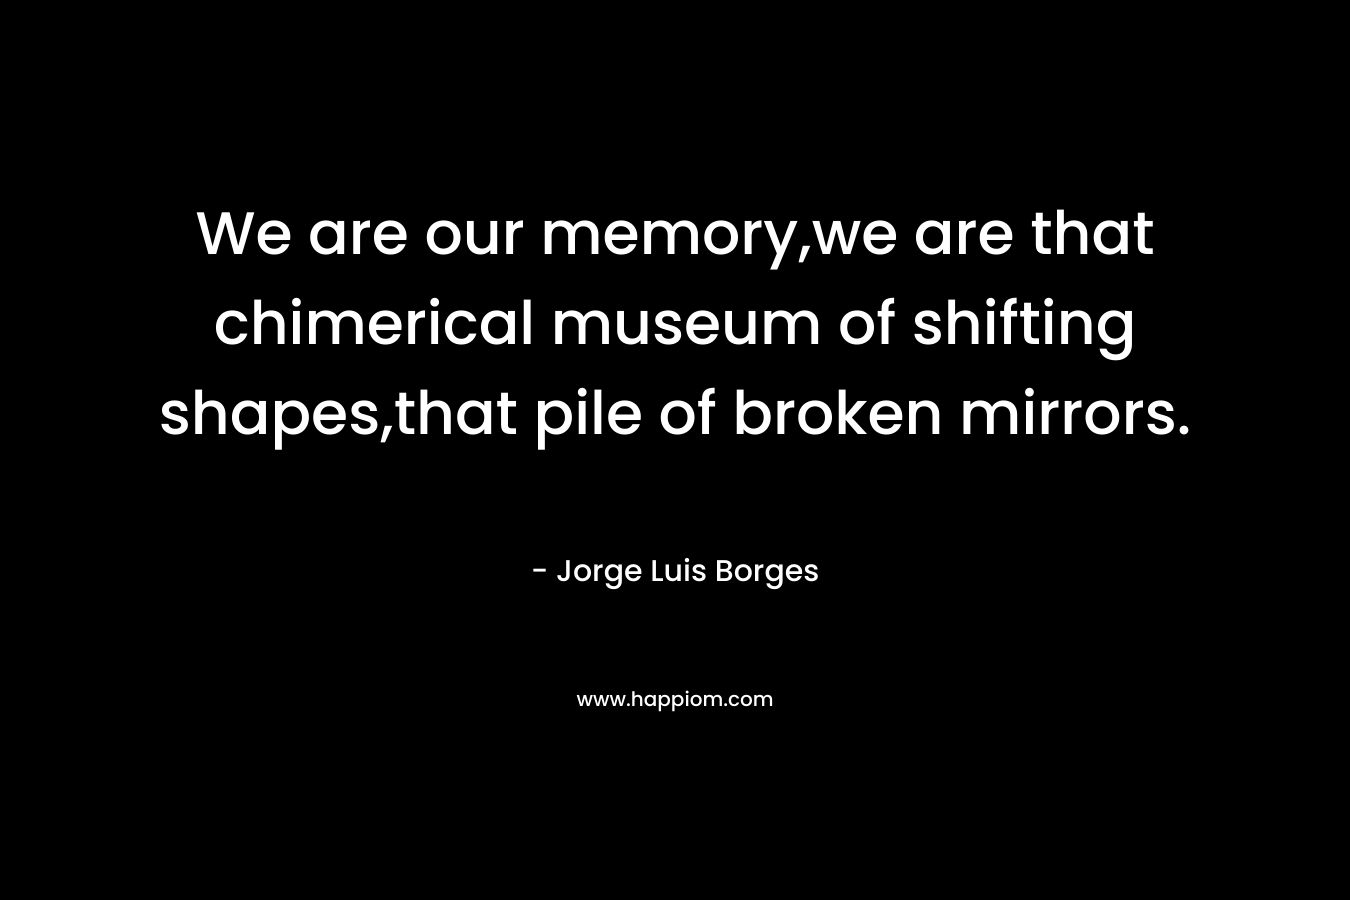 We are our memory,we are that chimerical museum of shifting shapes,that pile of broken mirrors.